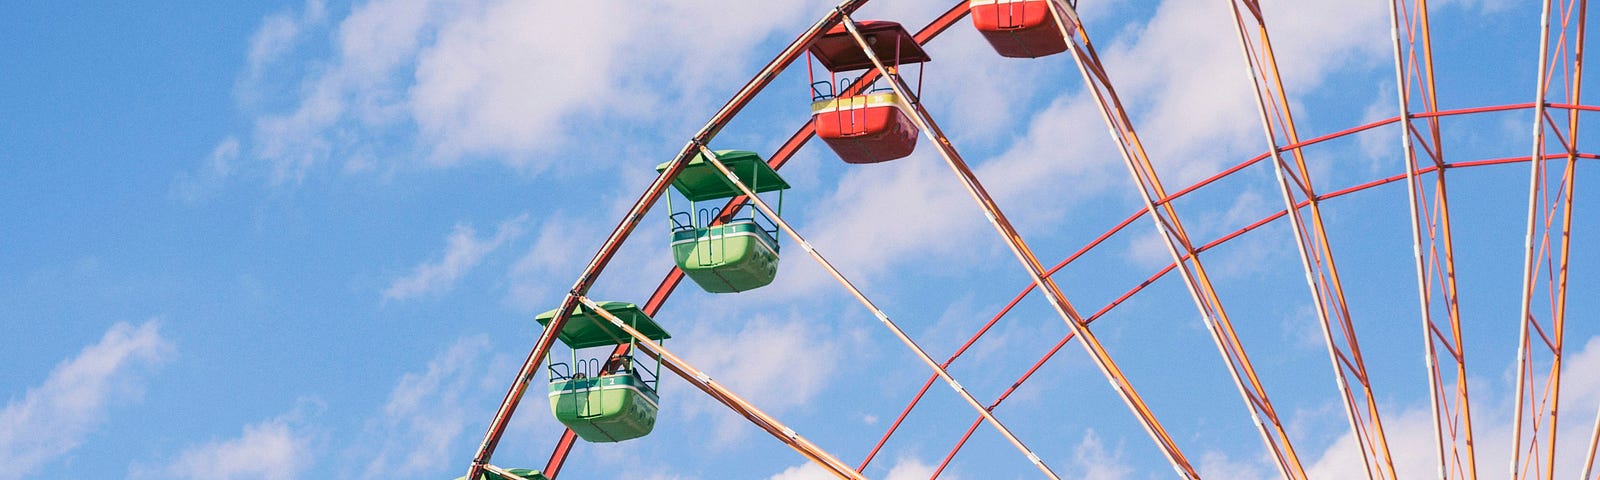 Ferris wheel with green seats and red seats, clouds in the background